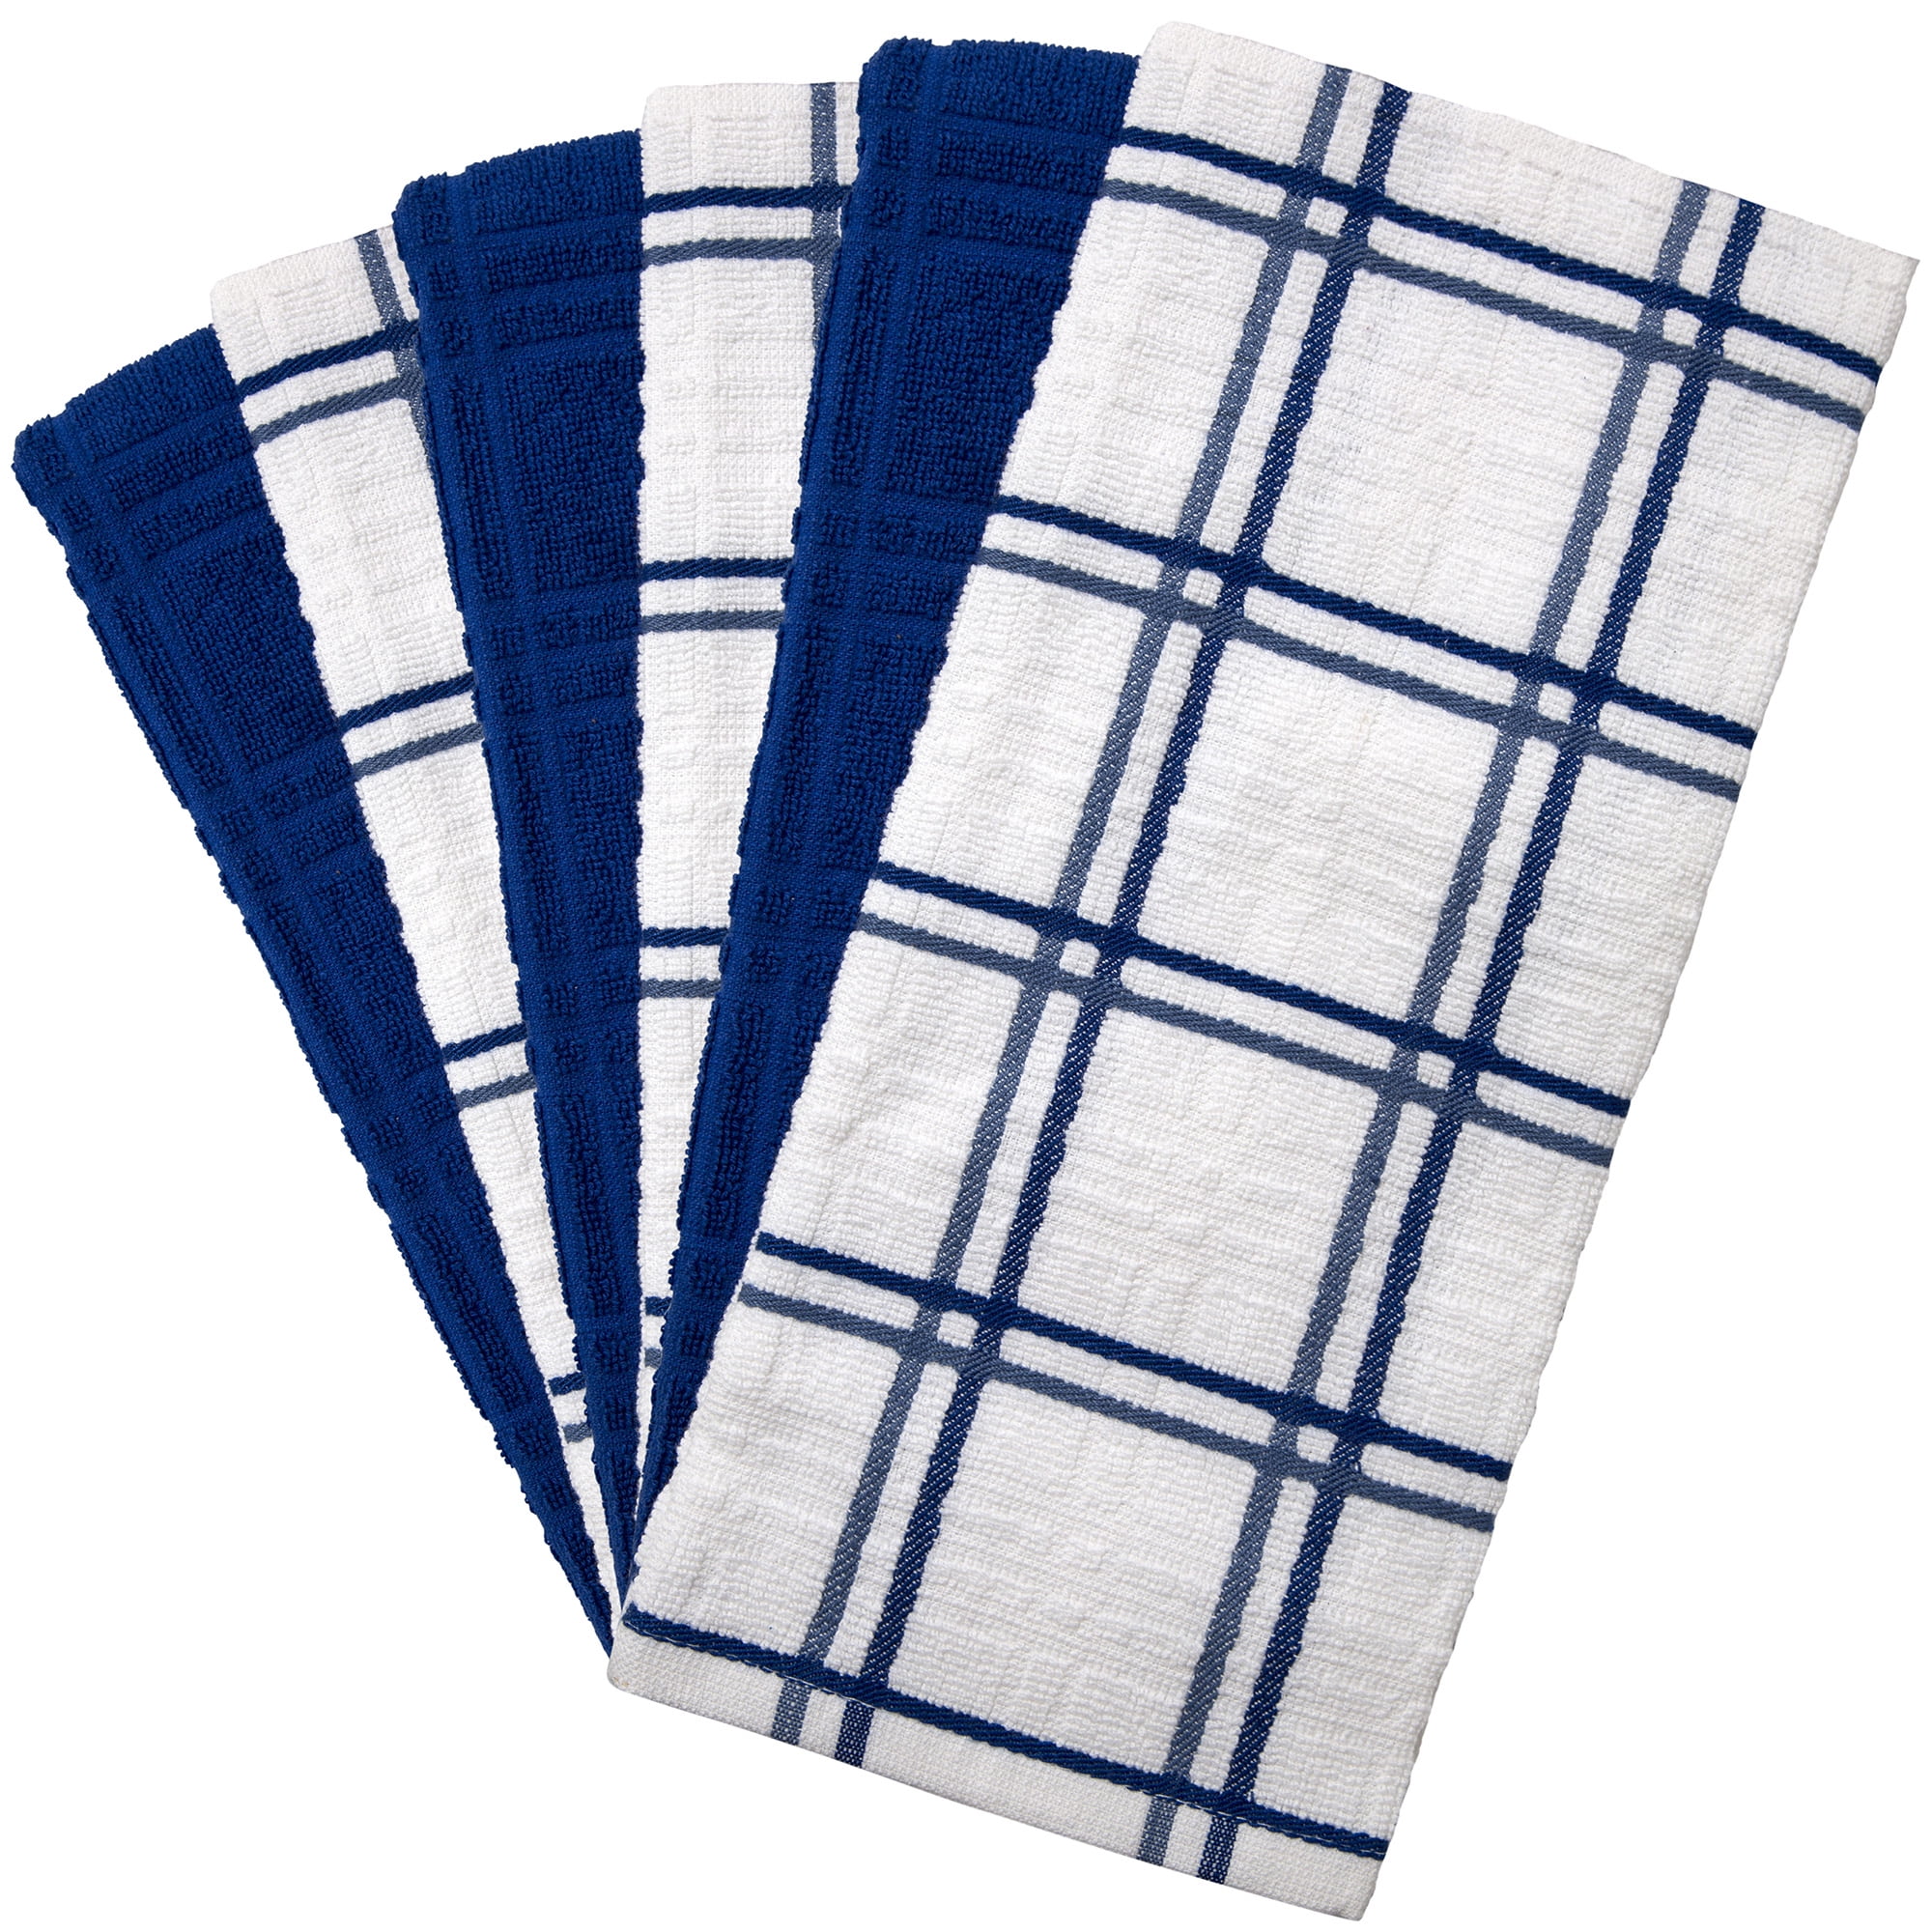 Fresh & Simple Navy Dot Weft Kitchen Towel, 16 x 26, 5 Pack